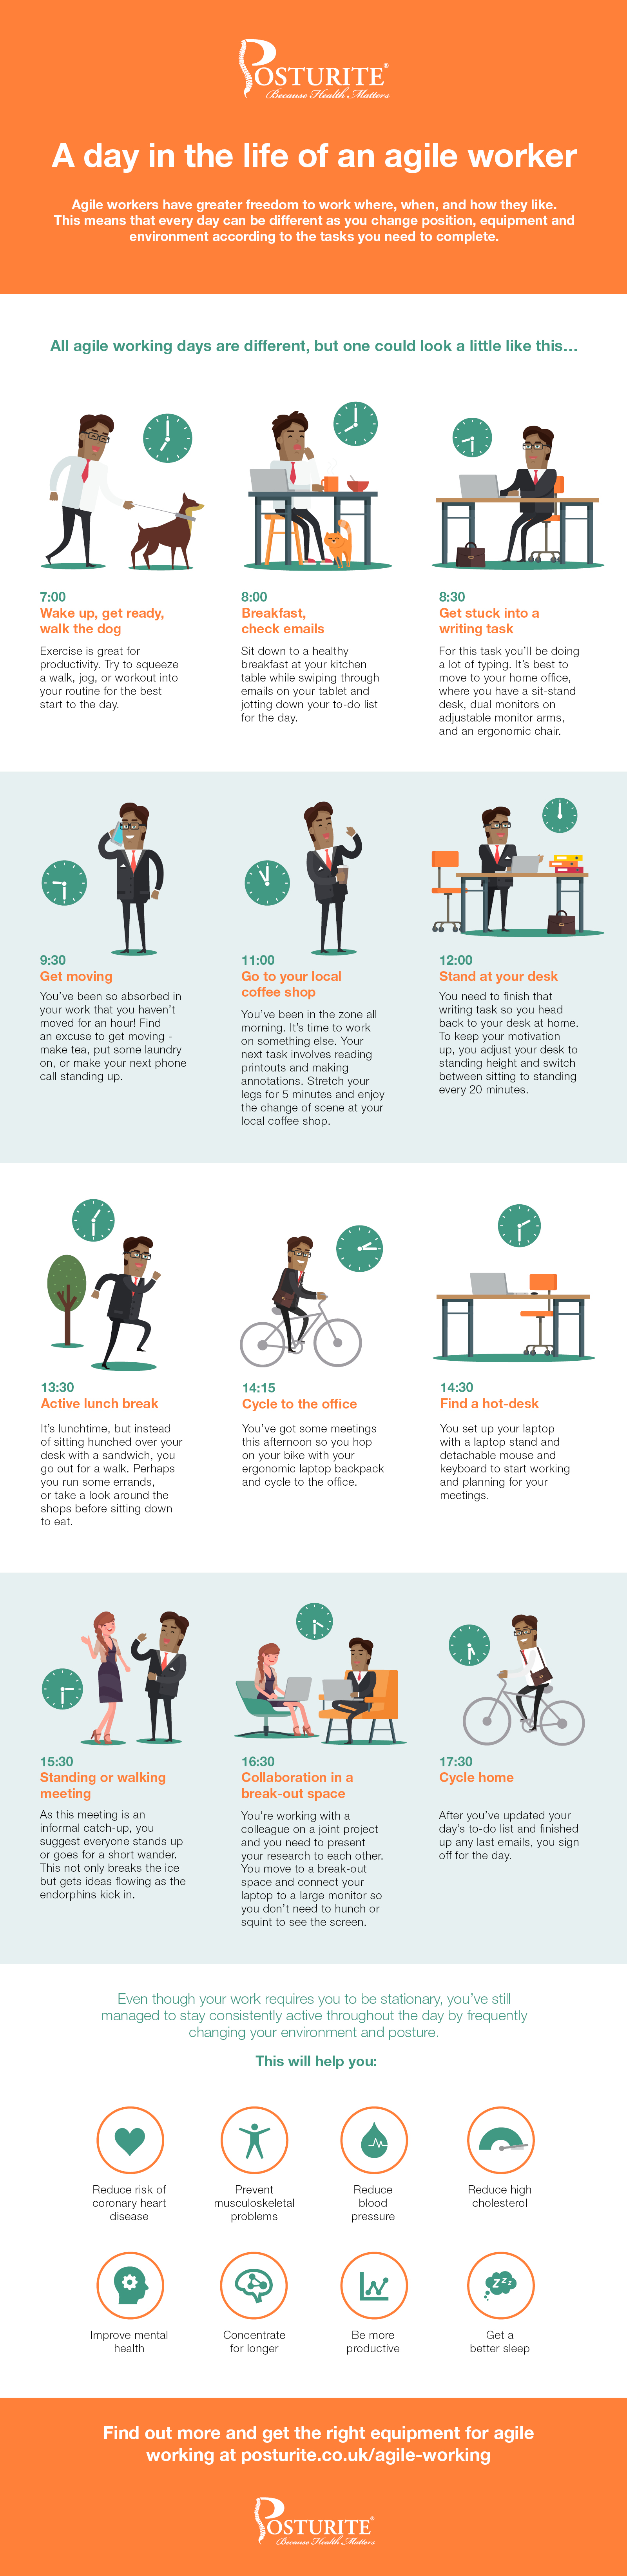 Download our 'A day in the life of an agile worker' infographic here